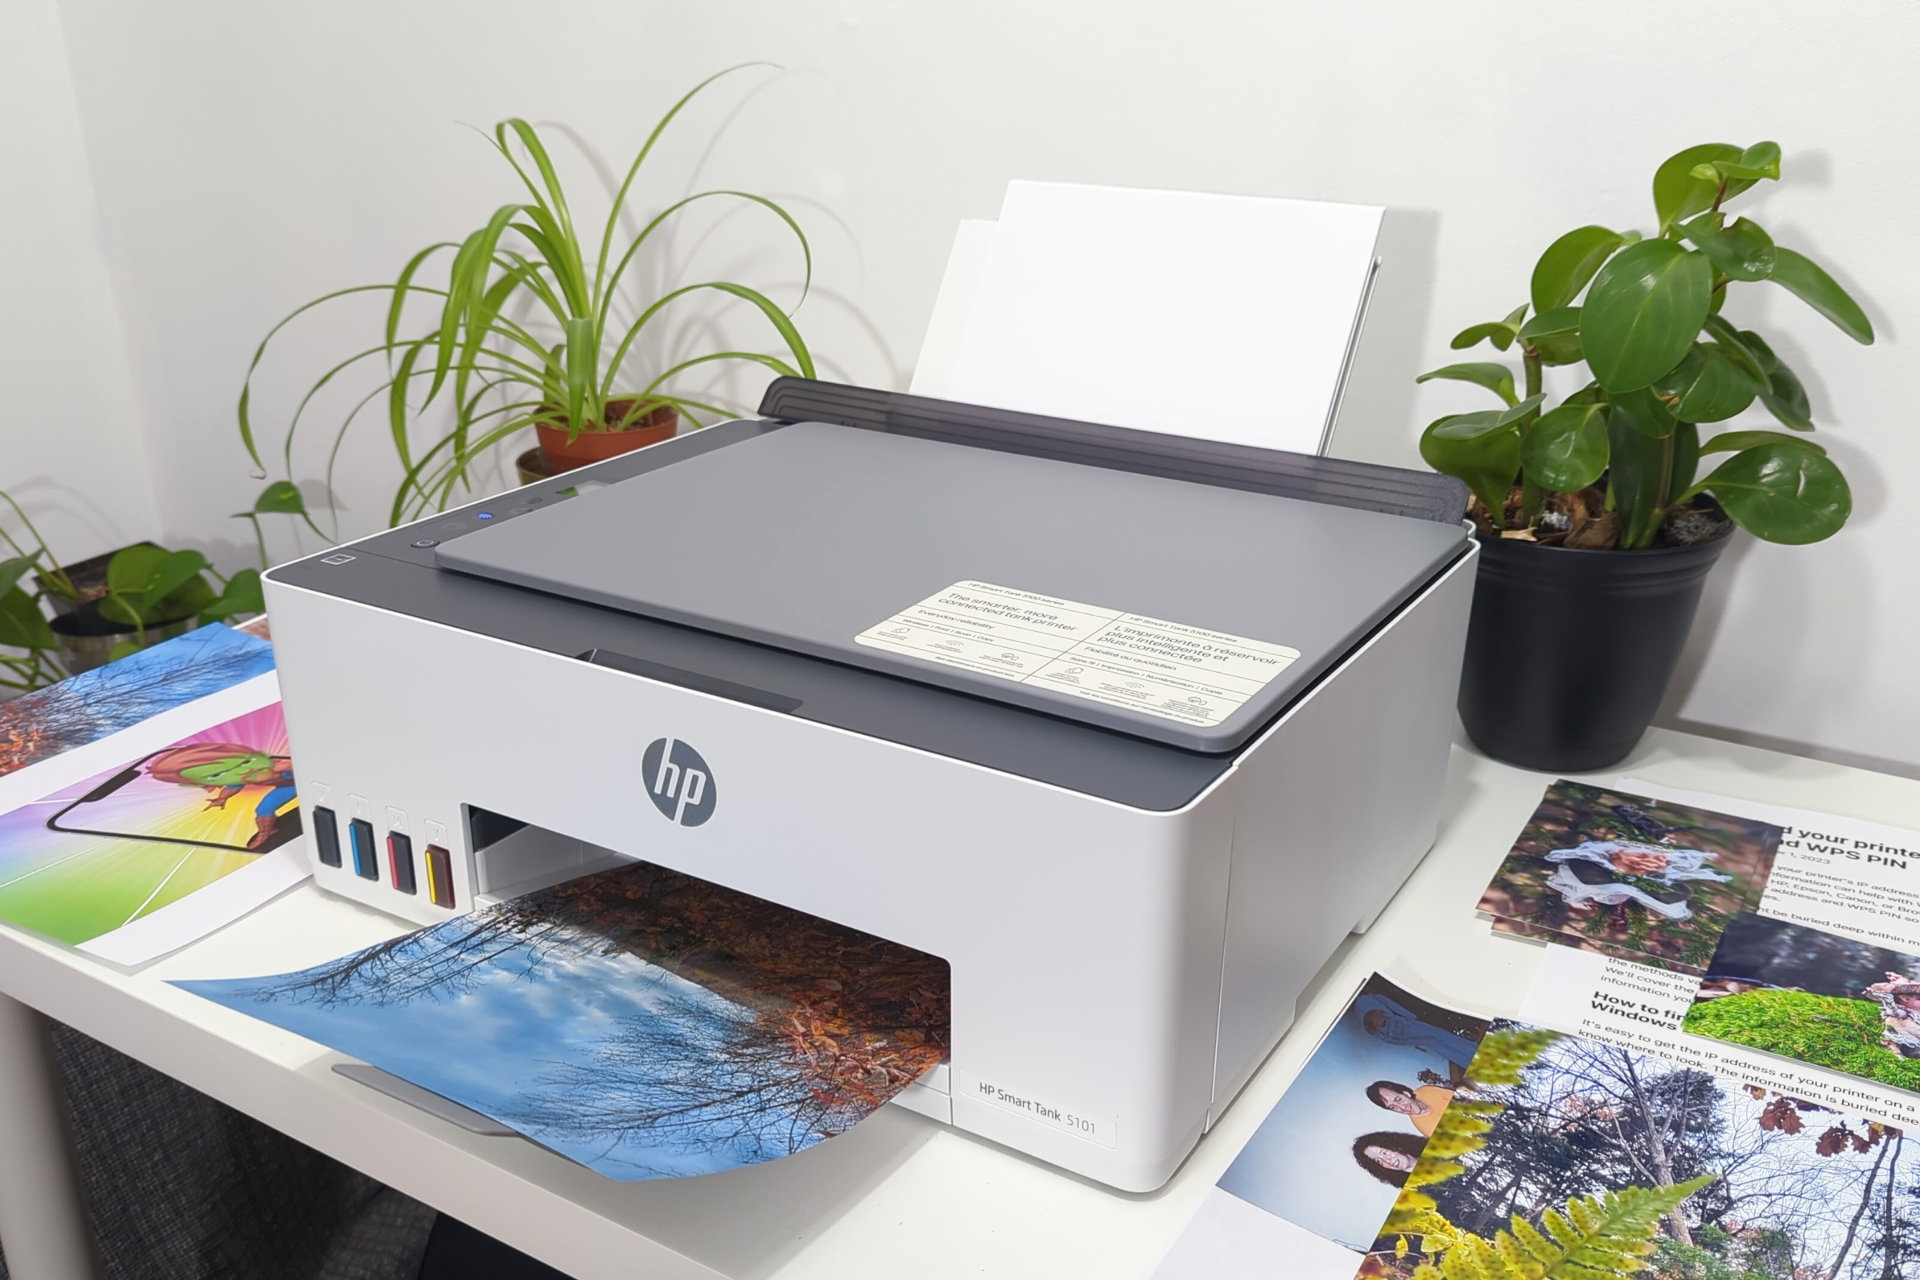 https://www.digitaltrends.com/wp-content/uploads/2023/11/The-HP-Smart-Tank-5101-isnt-fast-but-prints-are-inexpensive.jpg?p=1